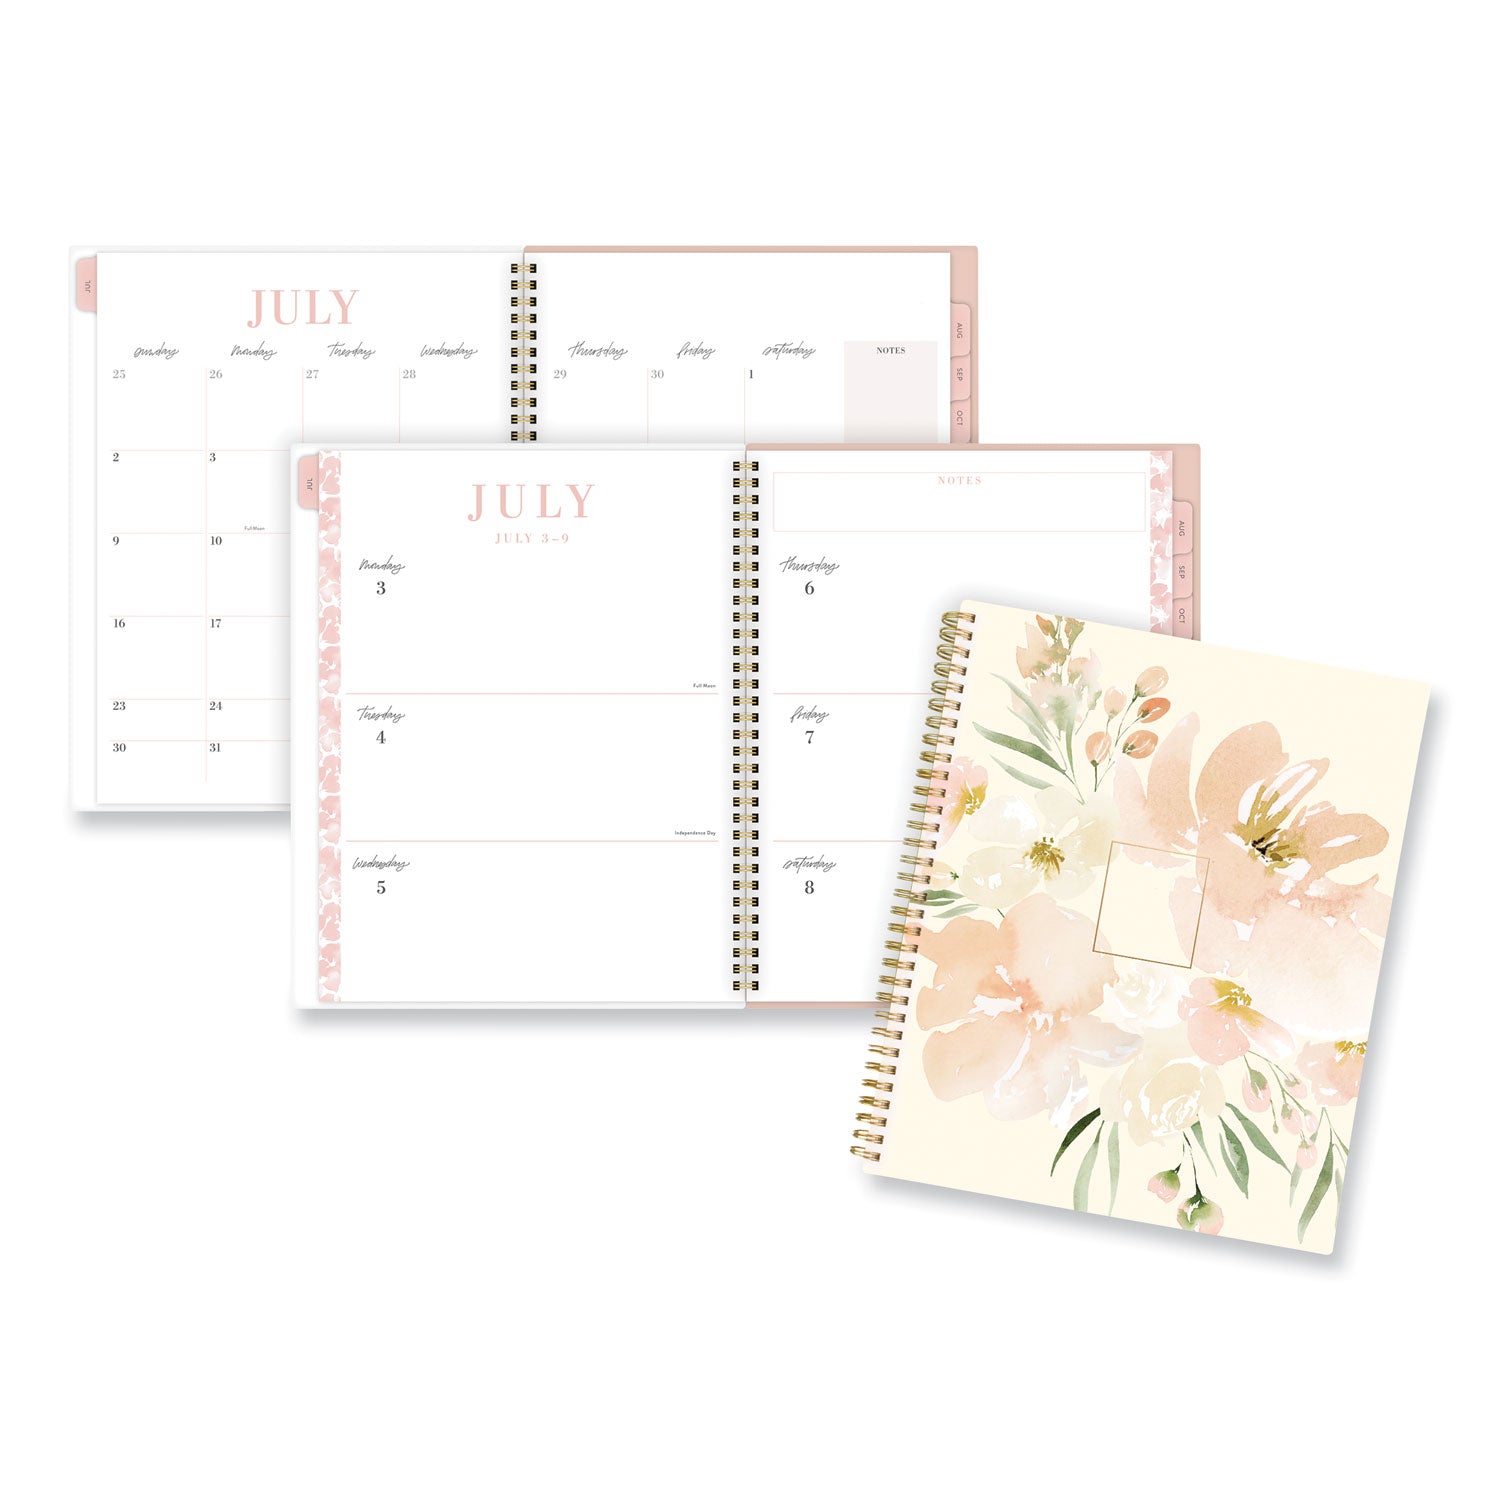 leah-bisch-academic-year-weekly-monthly-planner-floral-art-11-x-987-floral-cover-12-month-july-to-june-2023-to-2024_aaglb21905a - 1